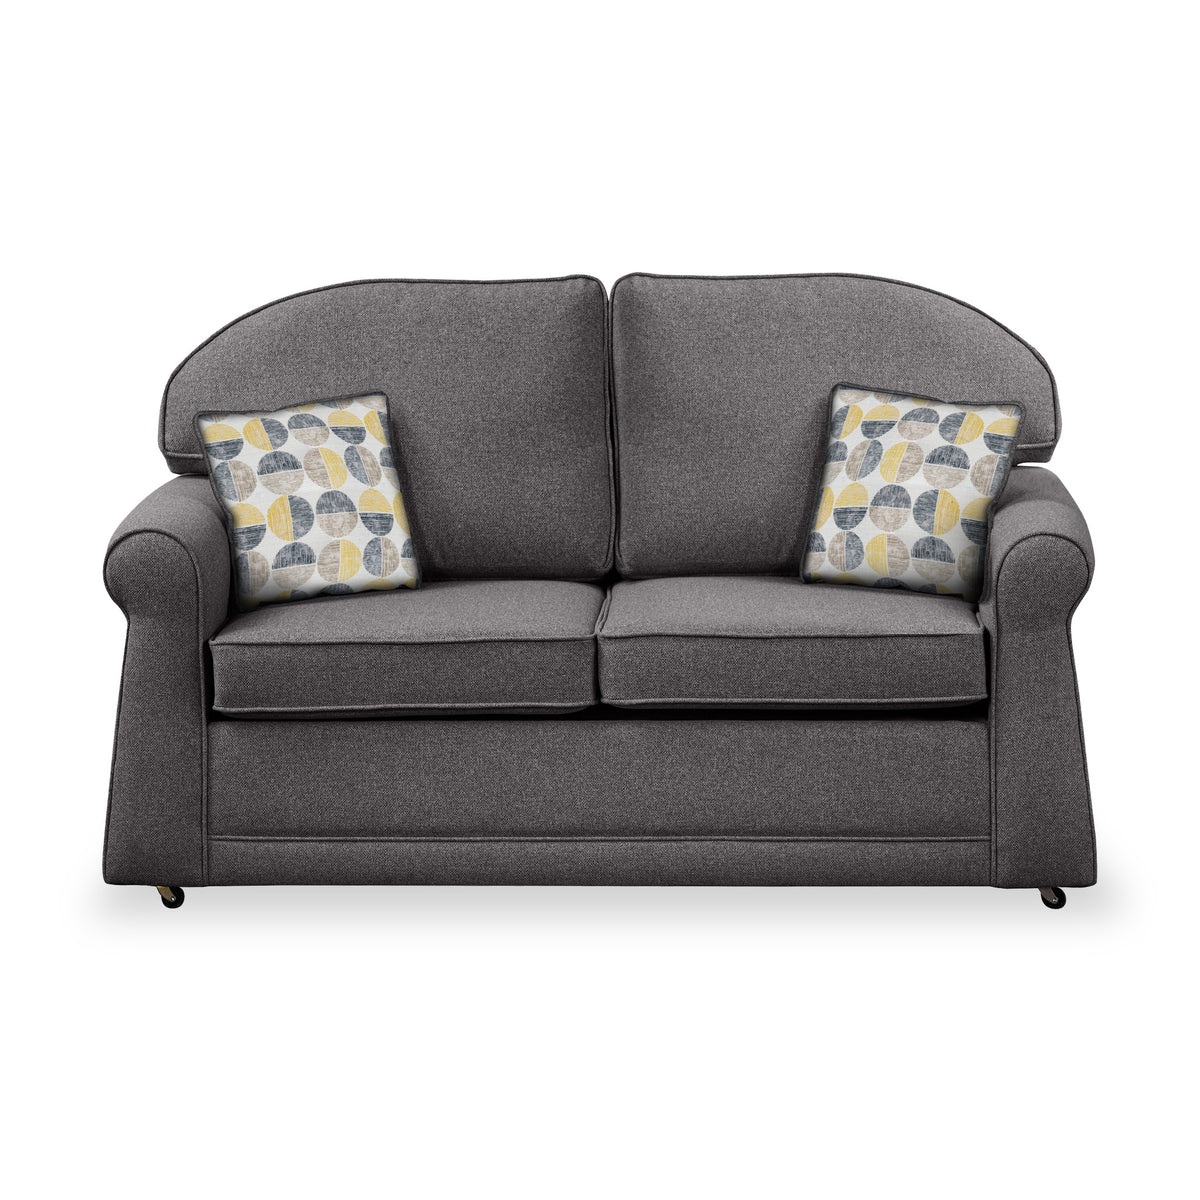 Giselle Charcoal Soft Weave 2 Seater Sofabed with Beige Scatter Cushions from Roseland Furniture